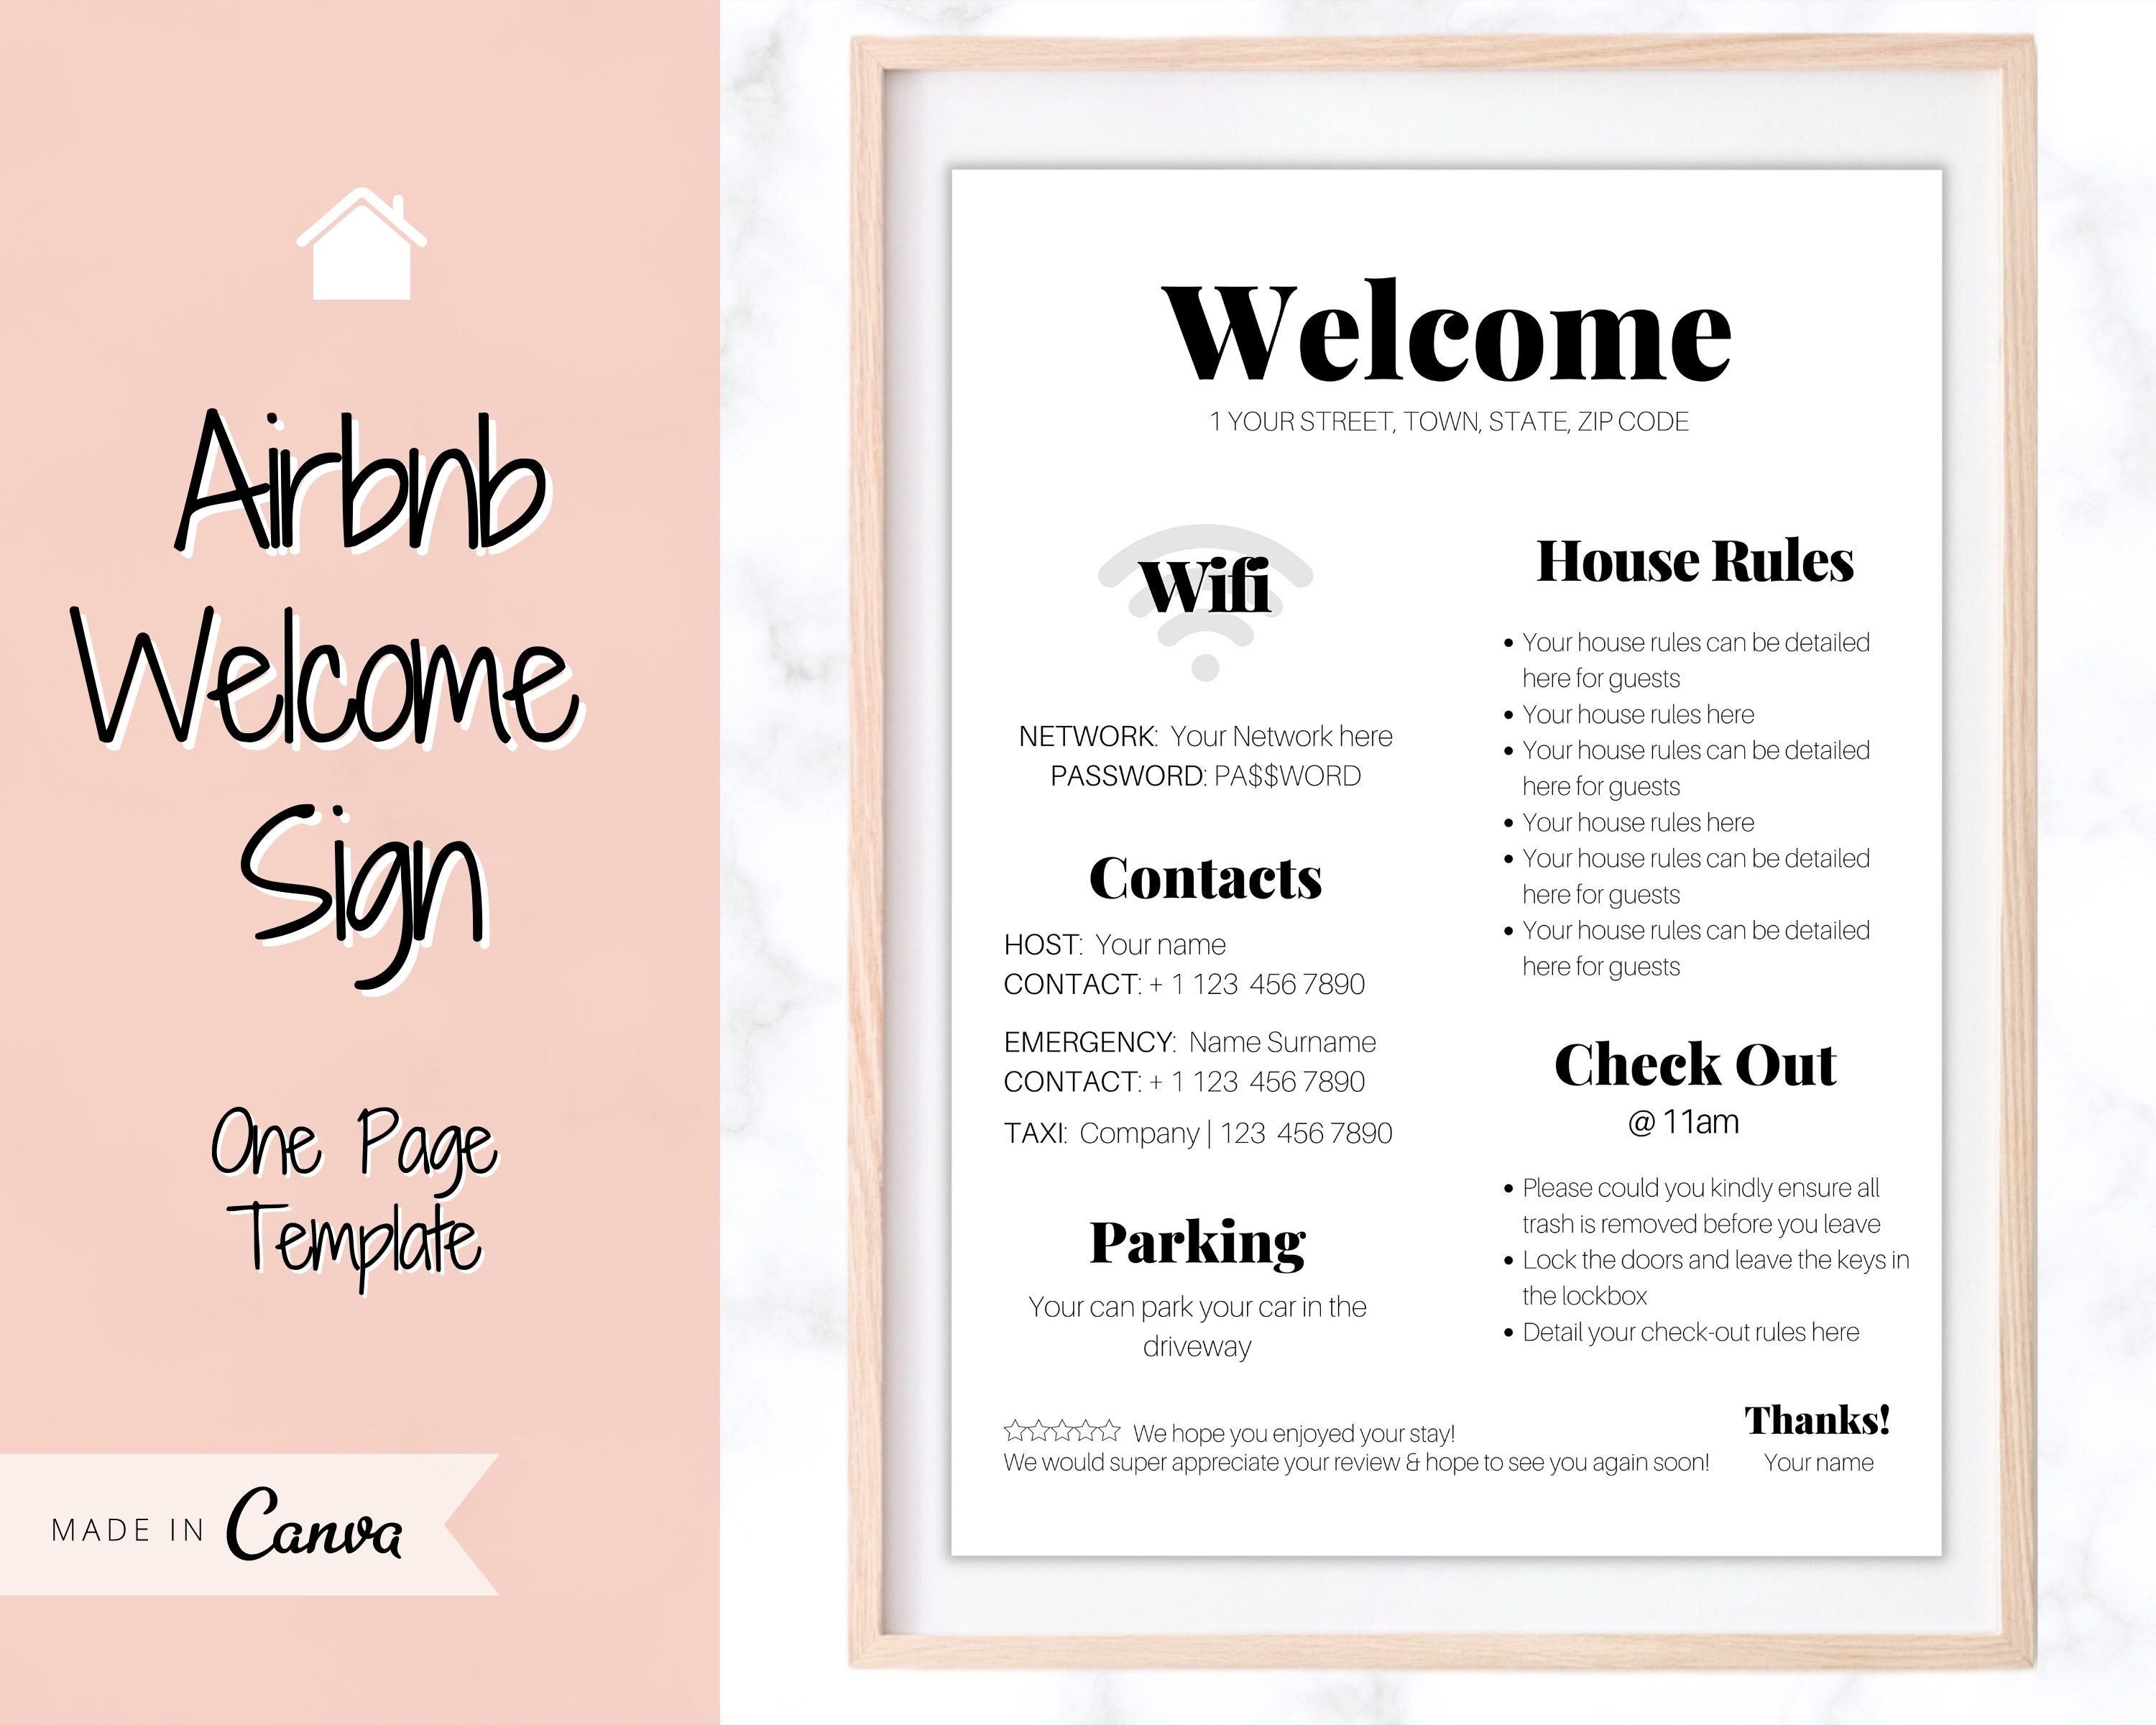 stationery-15-airbnb-posters-editable-template-bundle-wifi-password